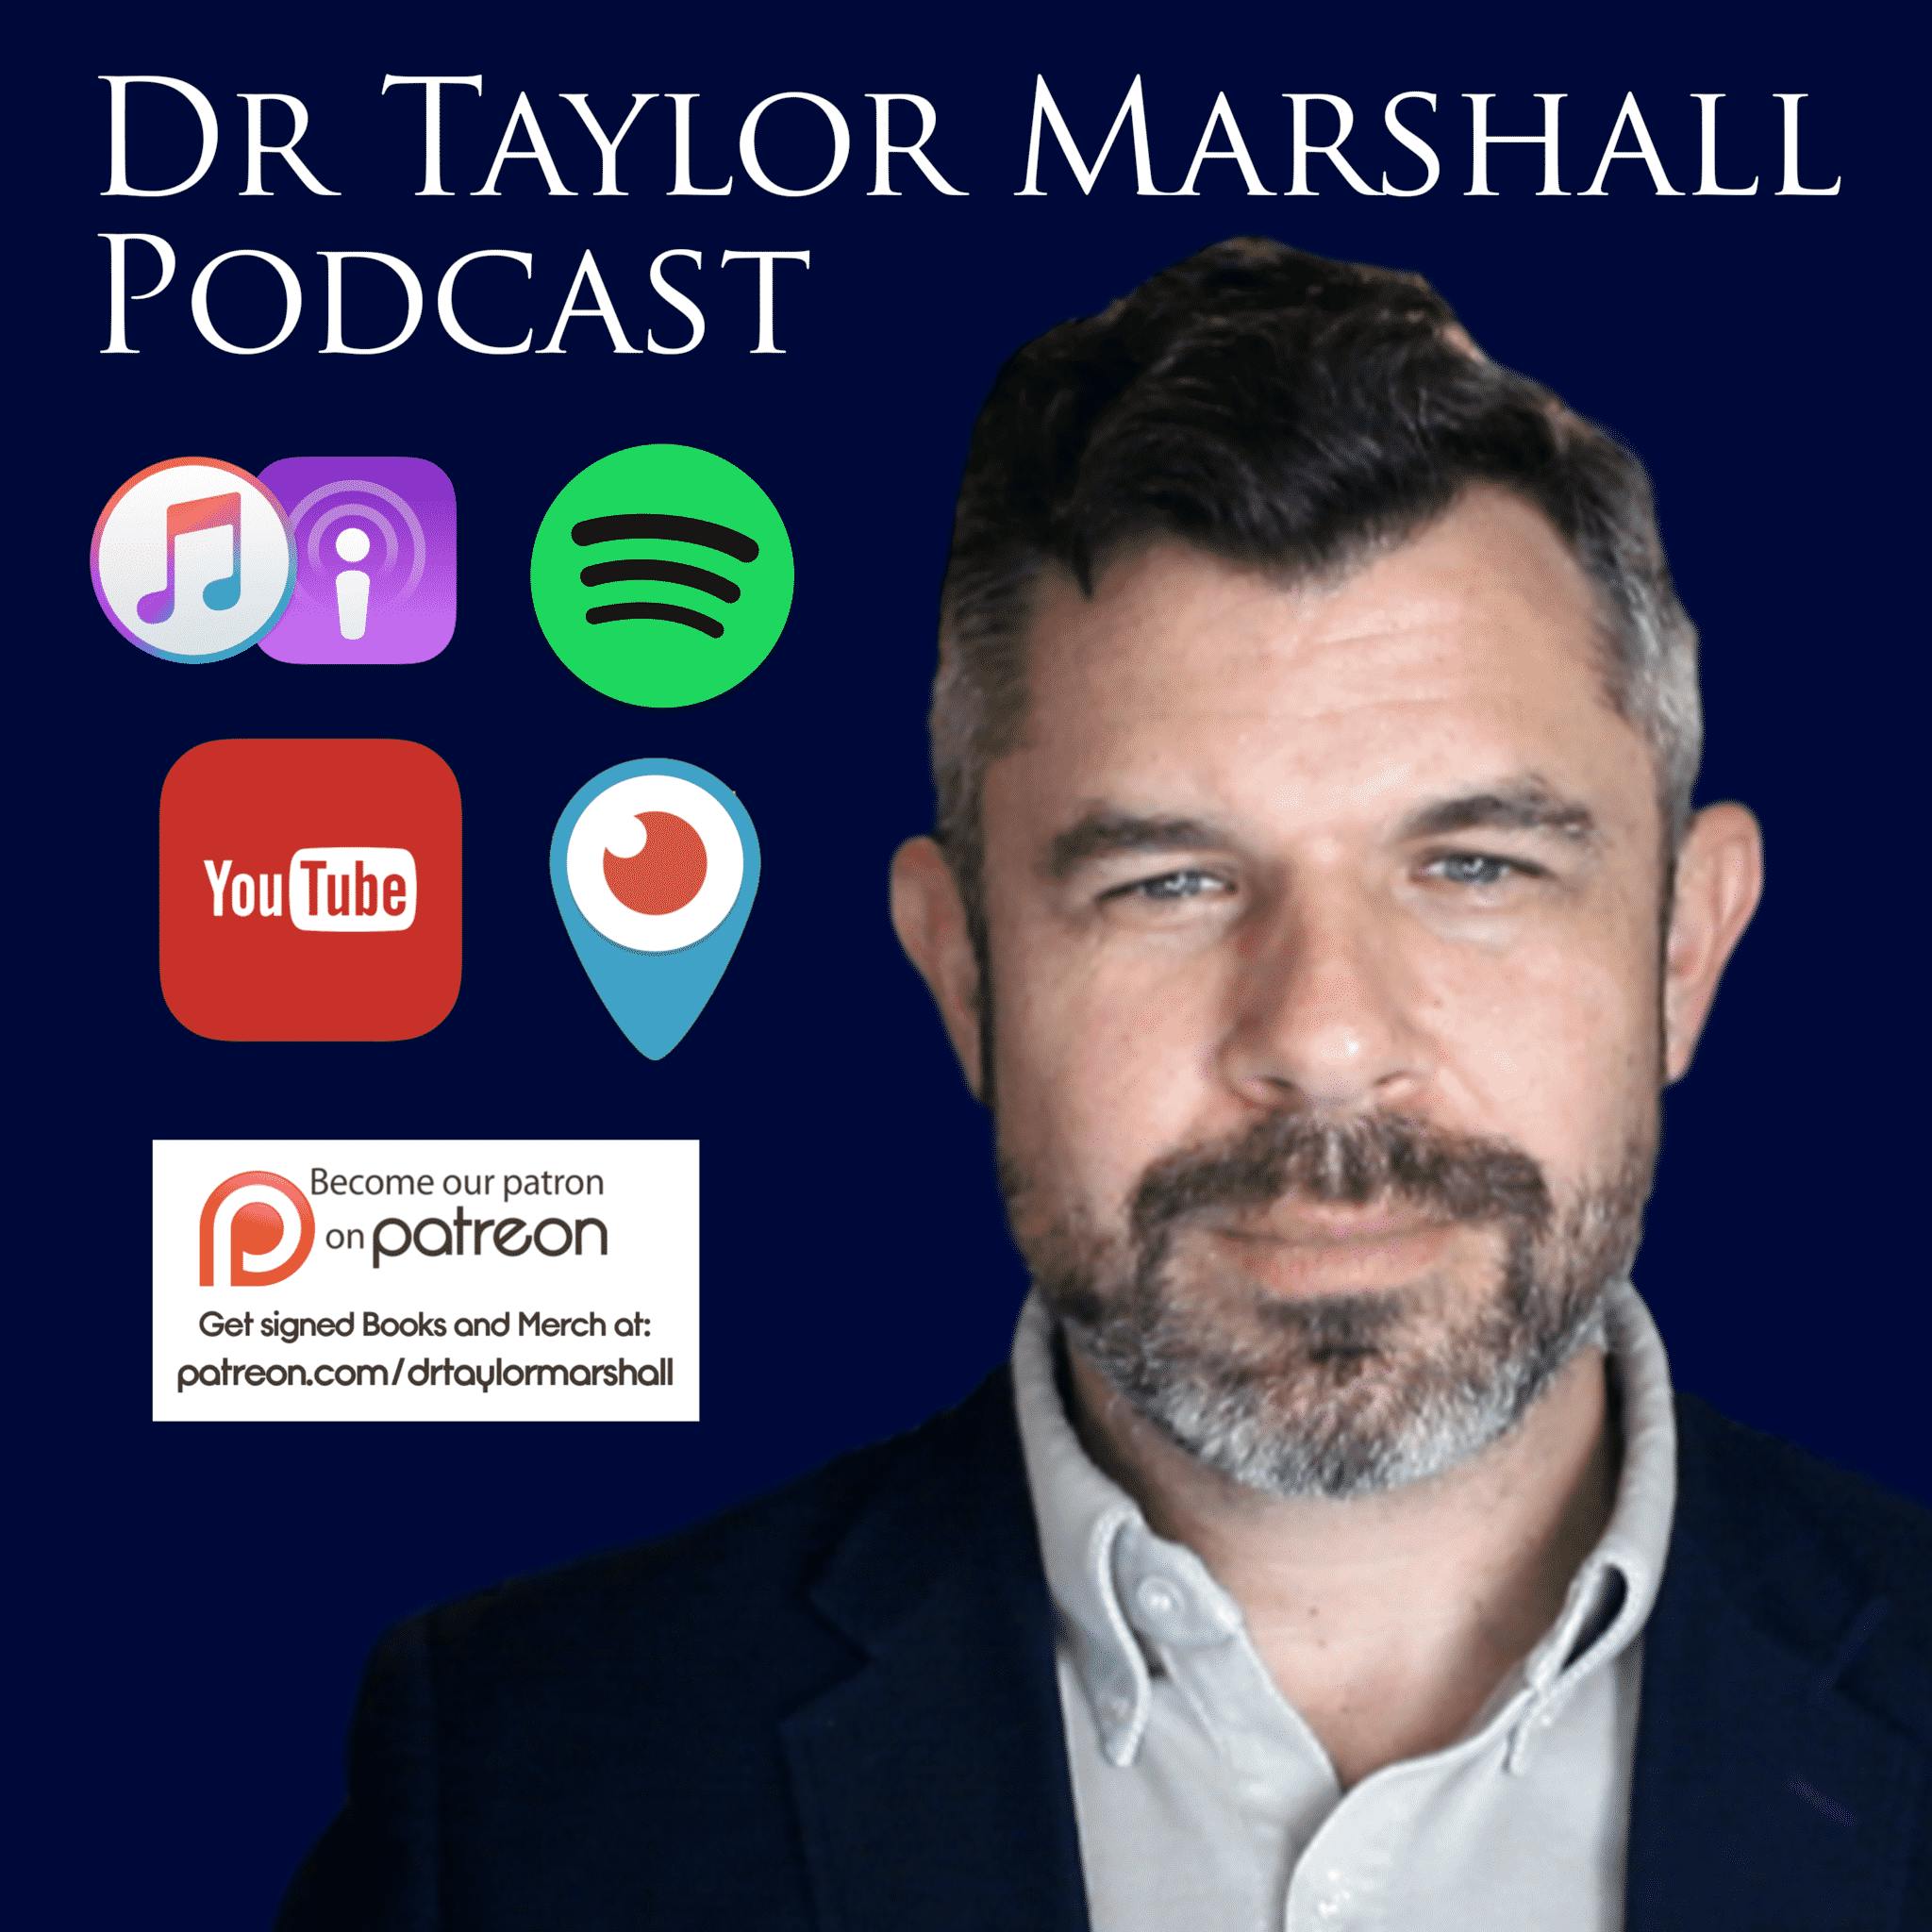 931: Dr. Taylor Marshall reacts to Chuck E. Cheese Mass [Podcast]